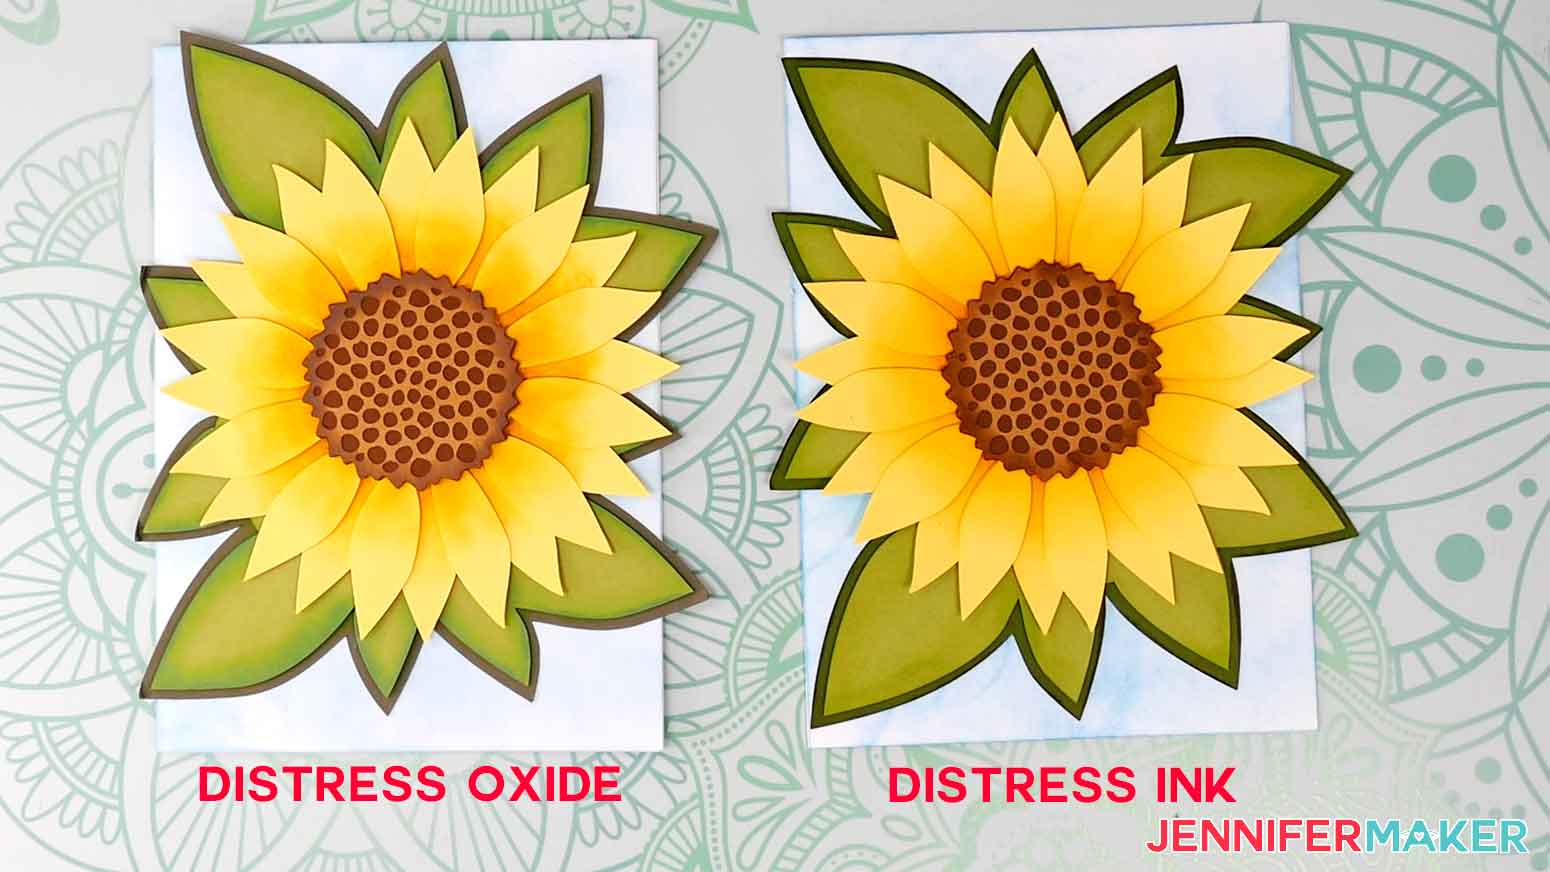 Finished inked sunflower cards with both distress oxides and distress inks.